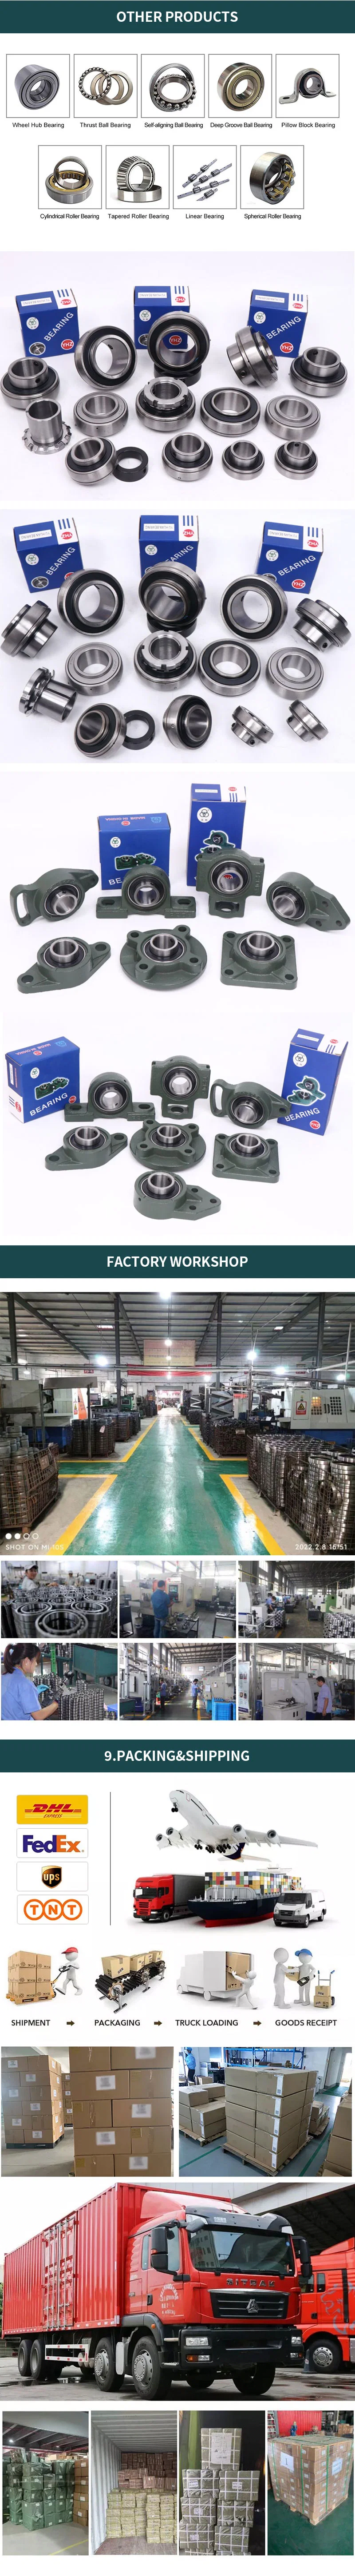 China Manufacturer UCP 207 Supplier Quality and Reliable China Pillow Block Bearing UCP Ucf UCT